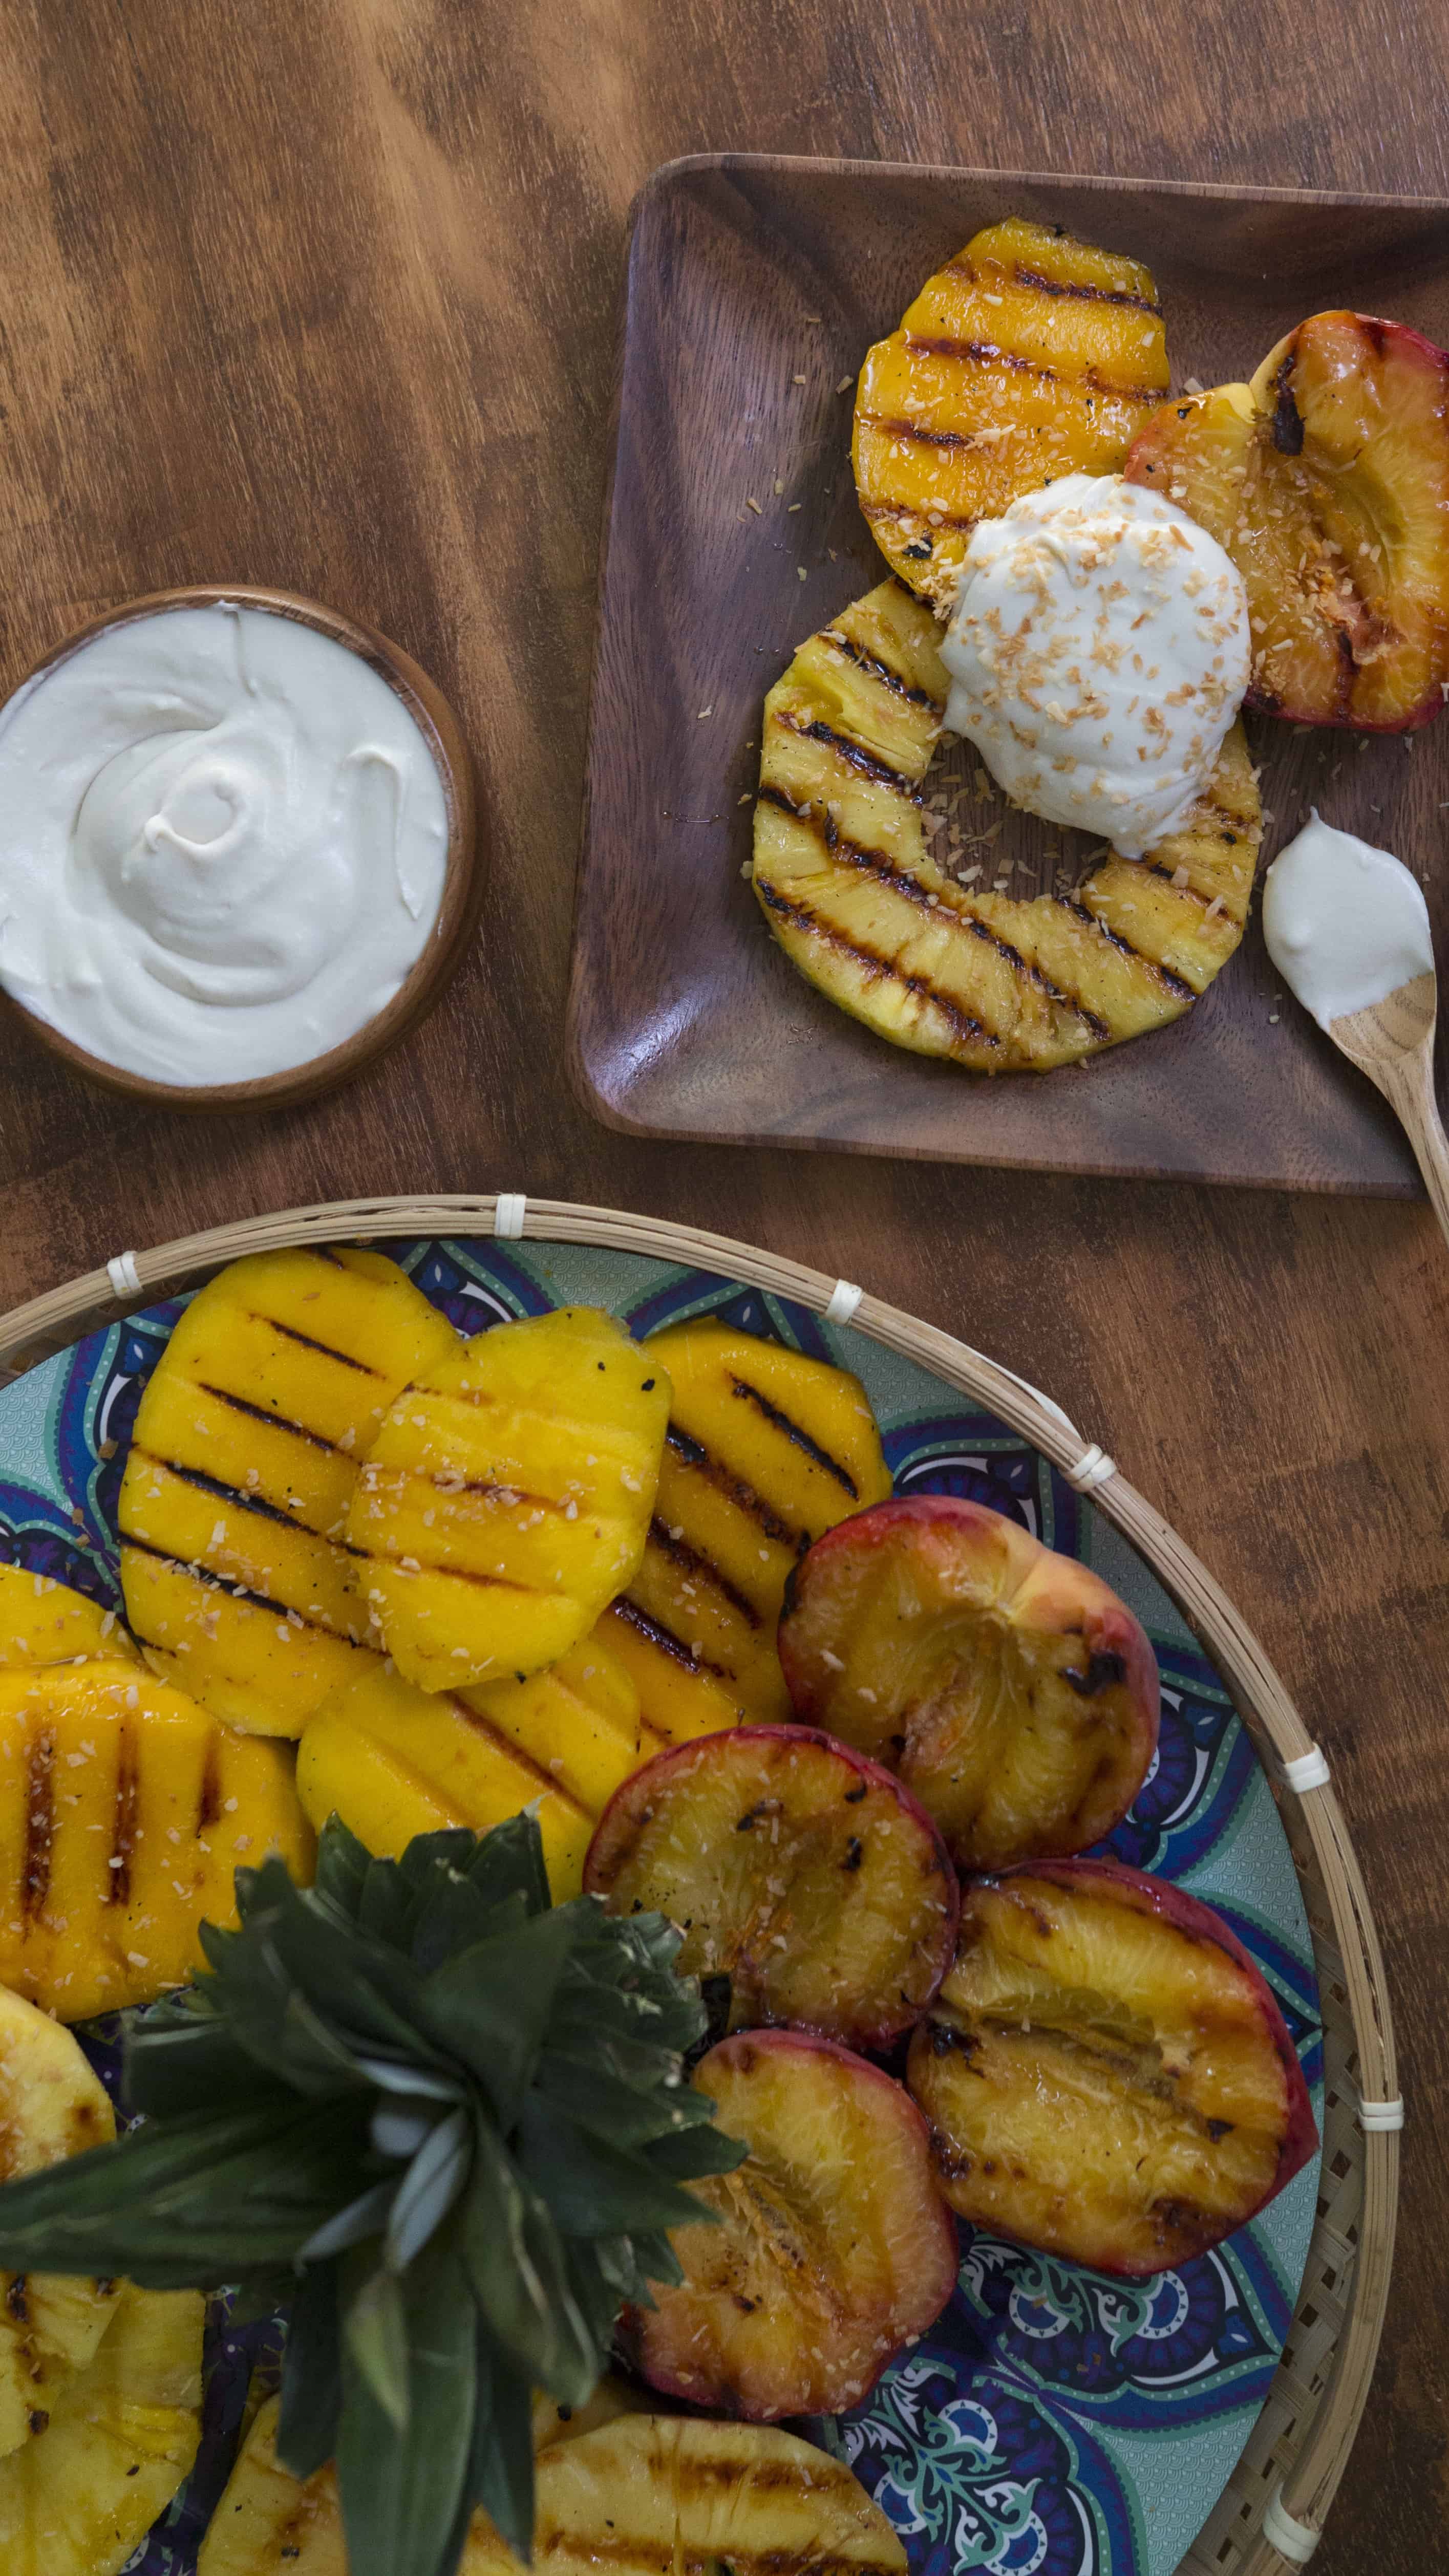 Grilled pineapple and peaches with coconut whipped cream